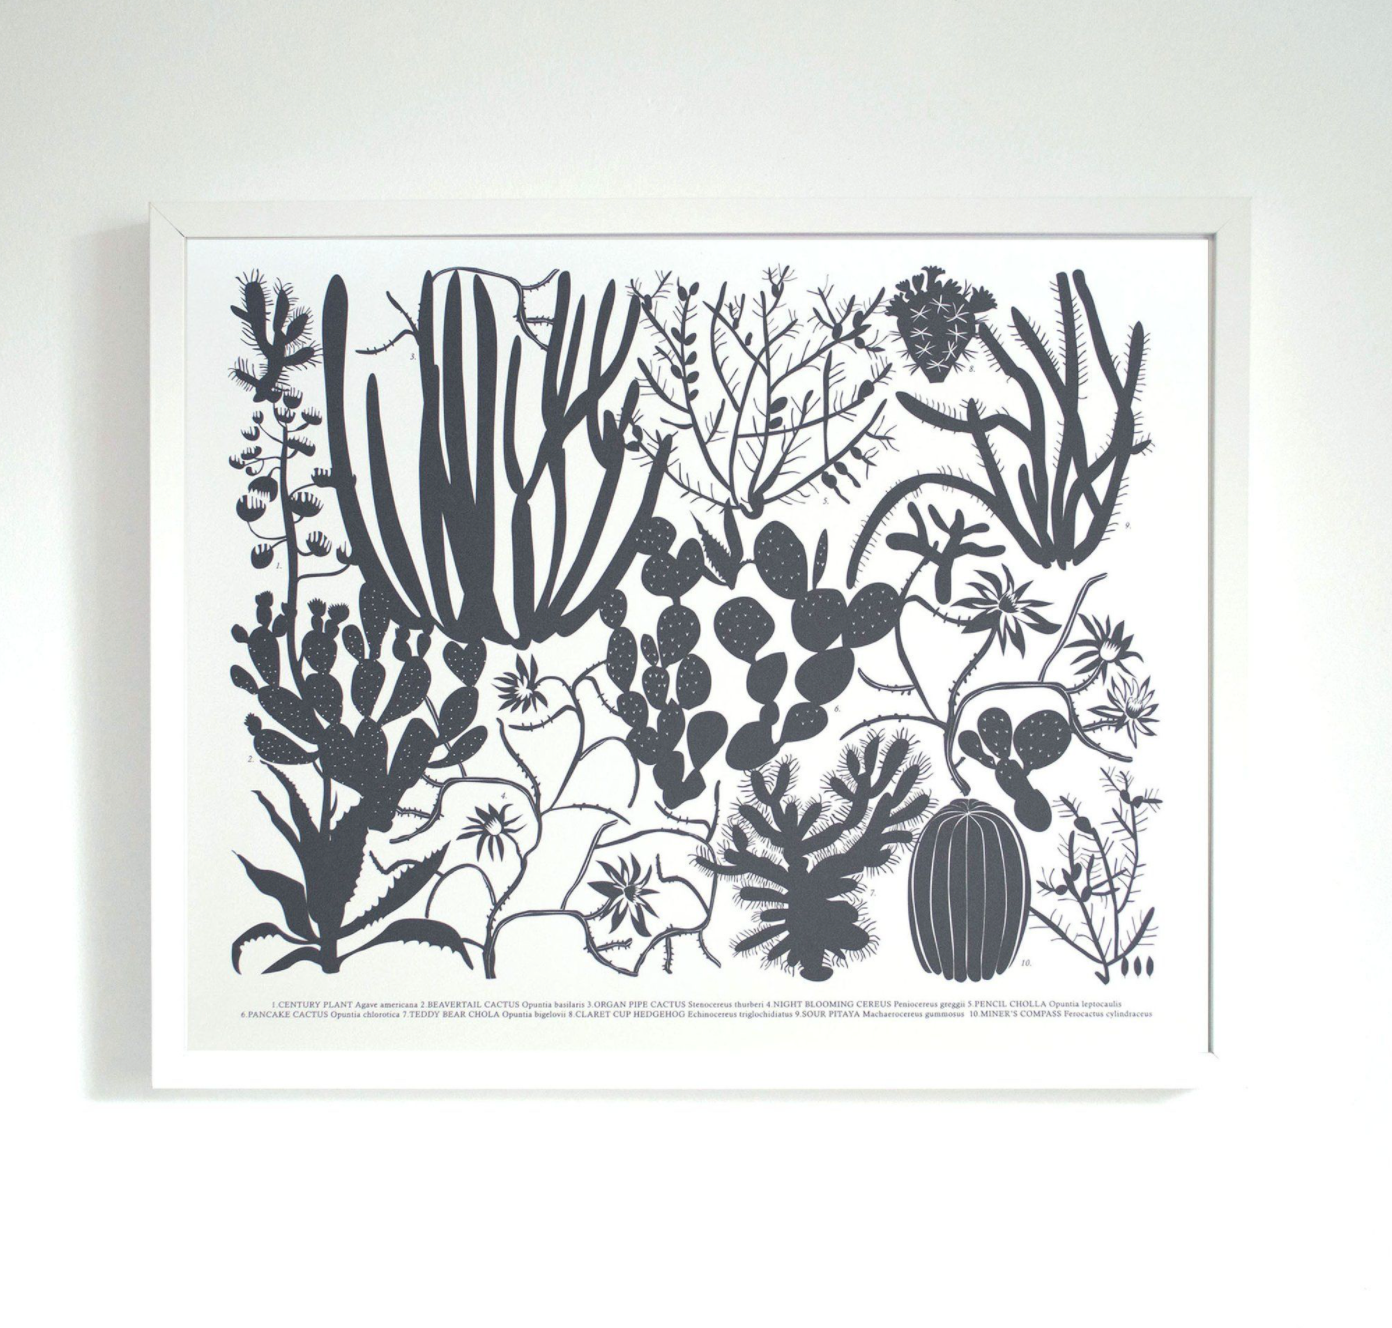 Framed print of screenprint on white wall; screenprint is various black cactuses placed close together  